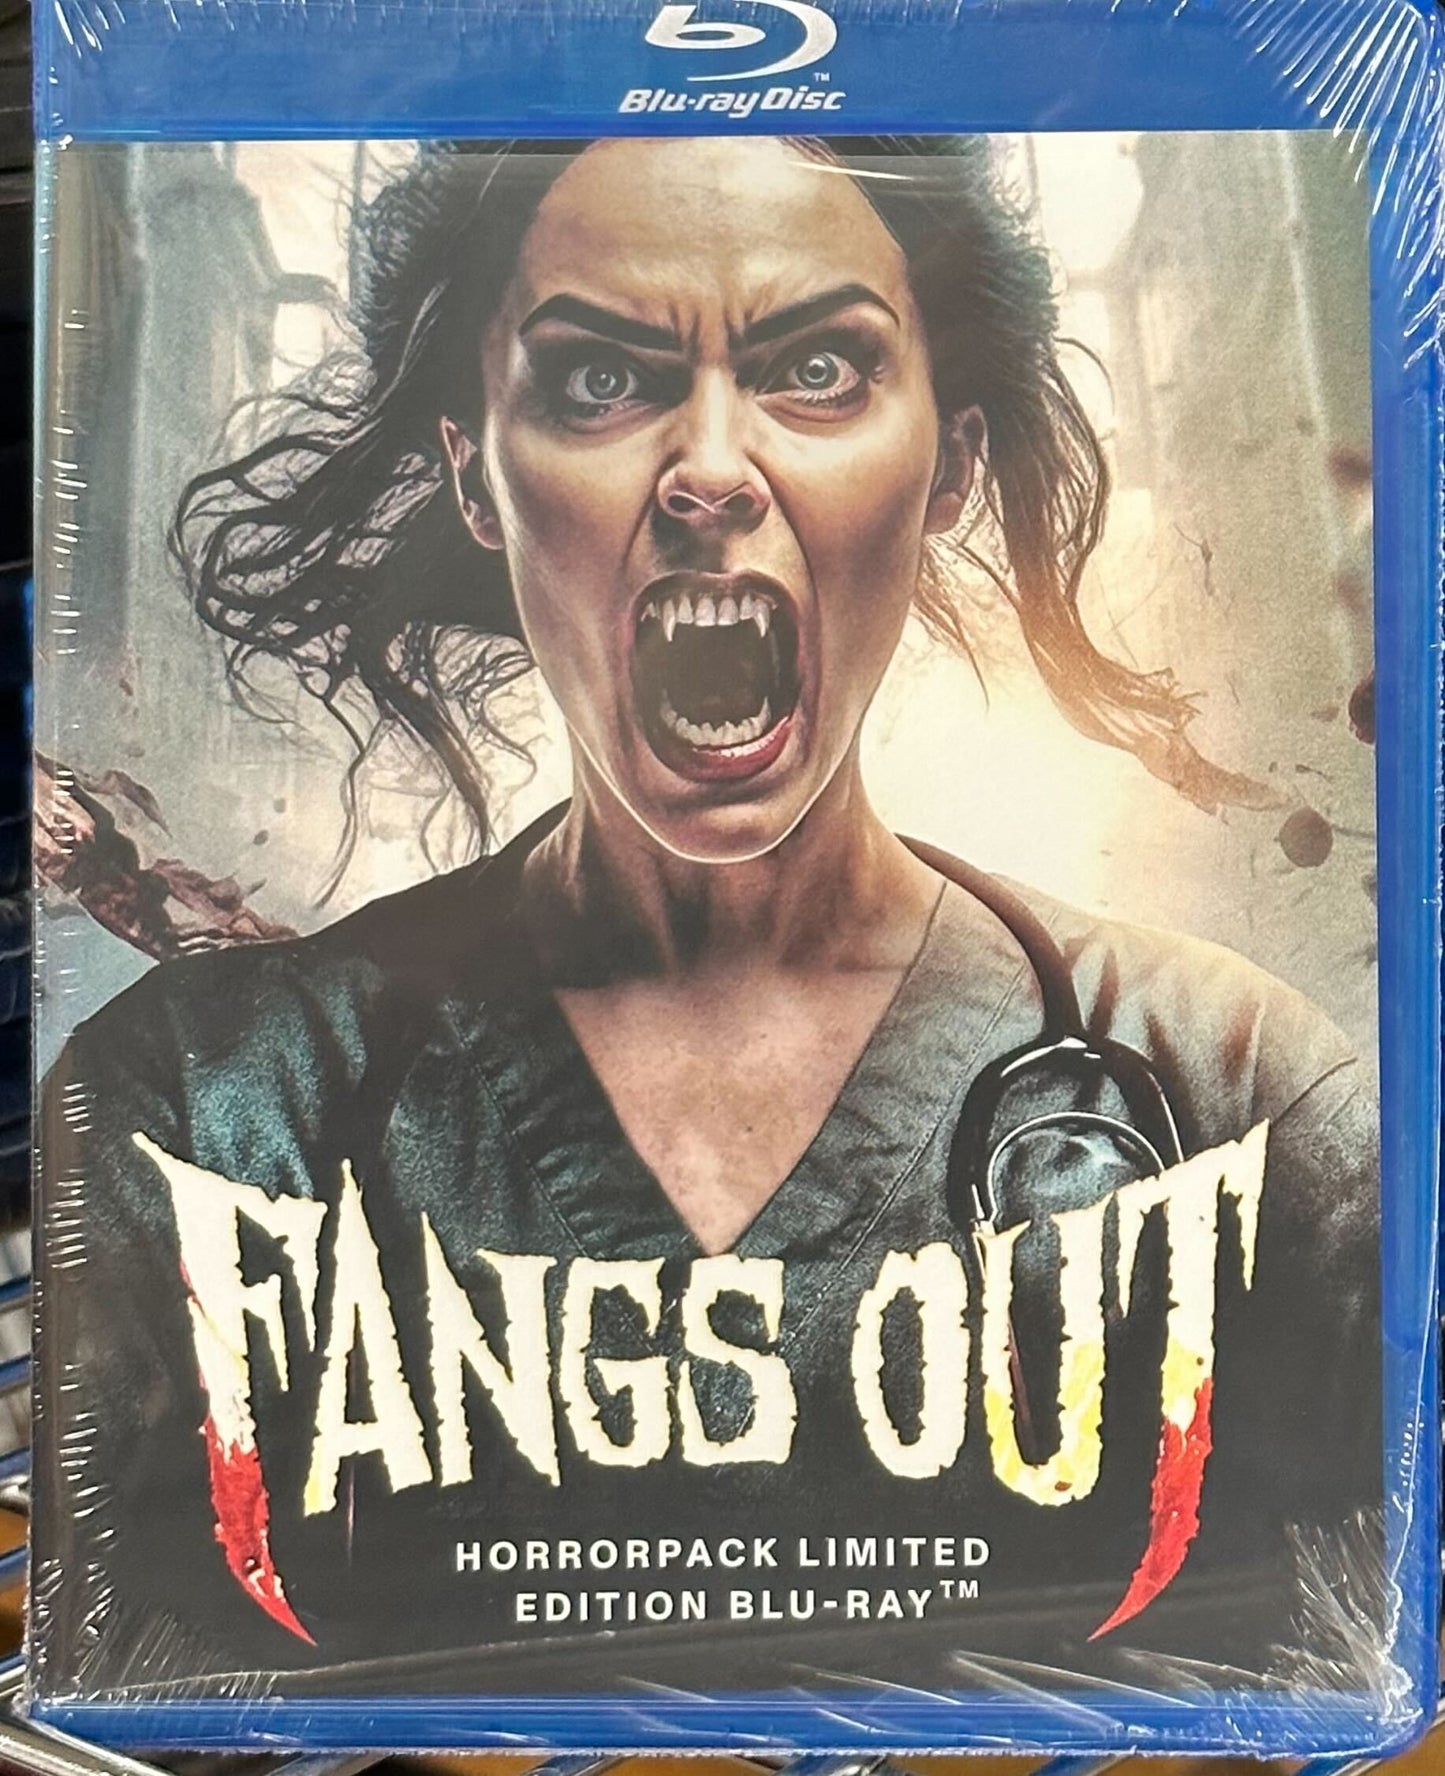 Fangs Out - HorrorPack Limited Edition Blu-ray #84